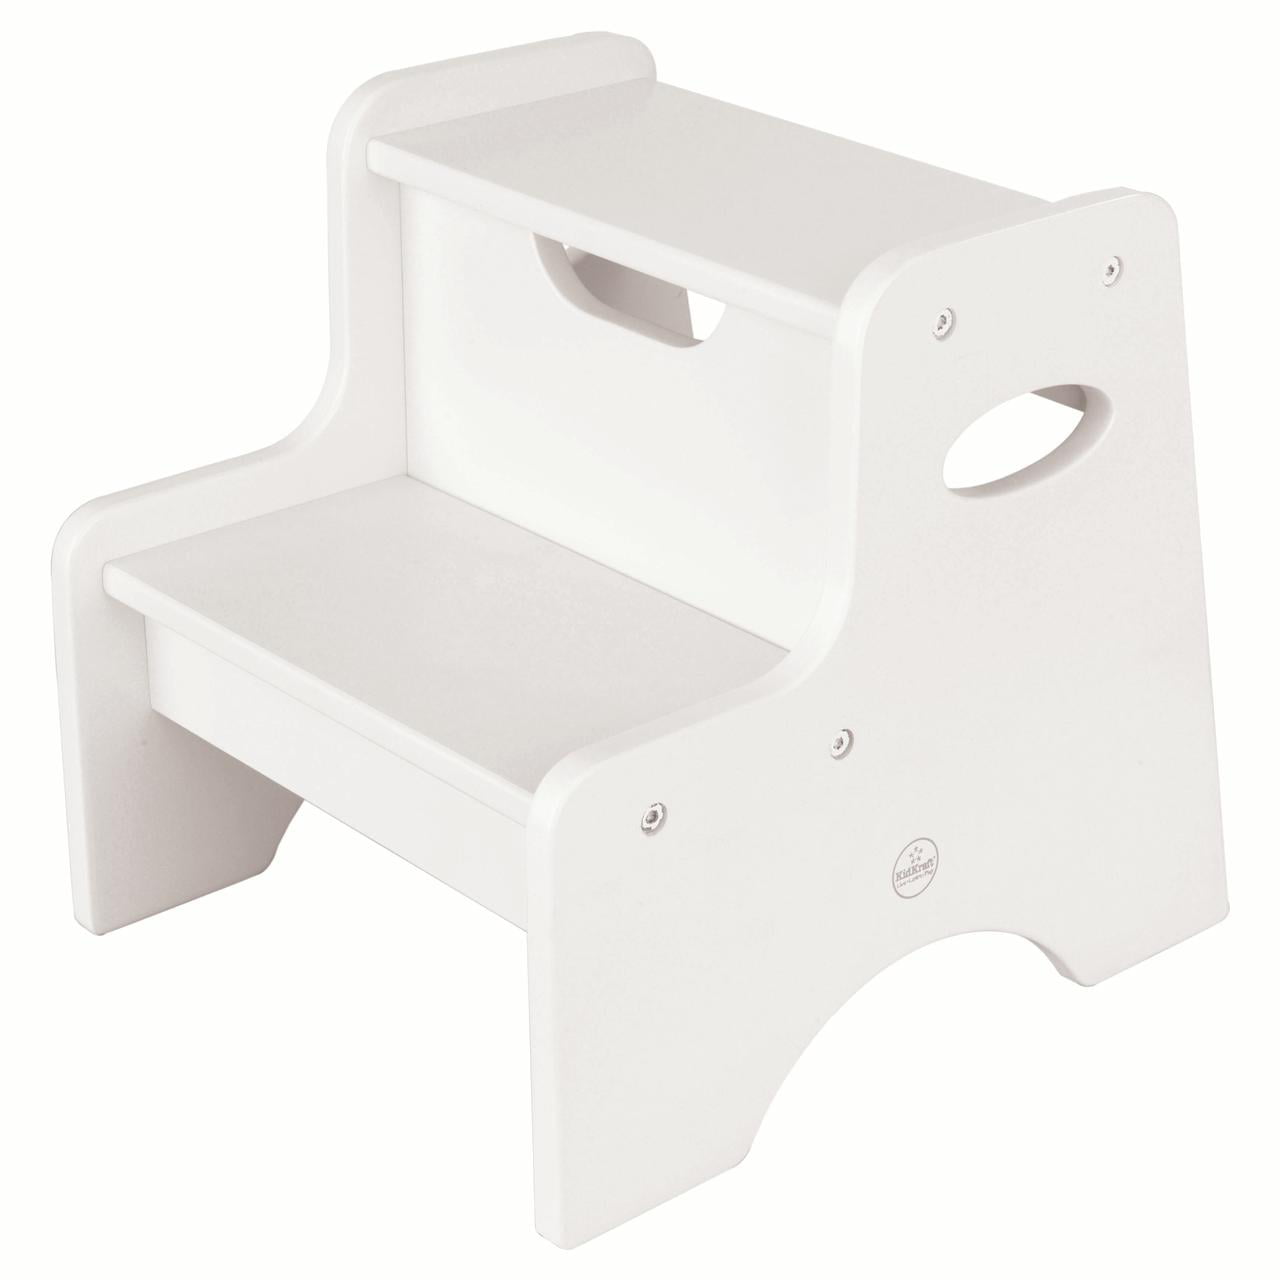 Photo 1 of KidKraft Two Step Stool in White NEW